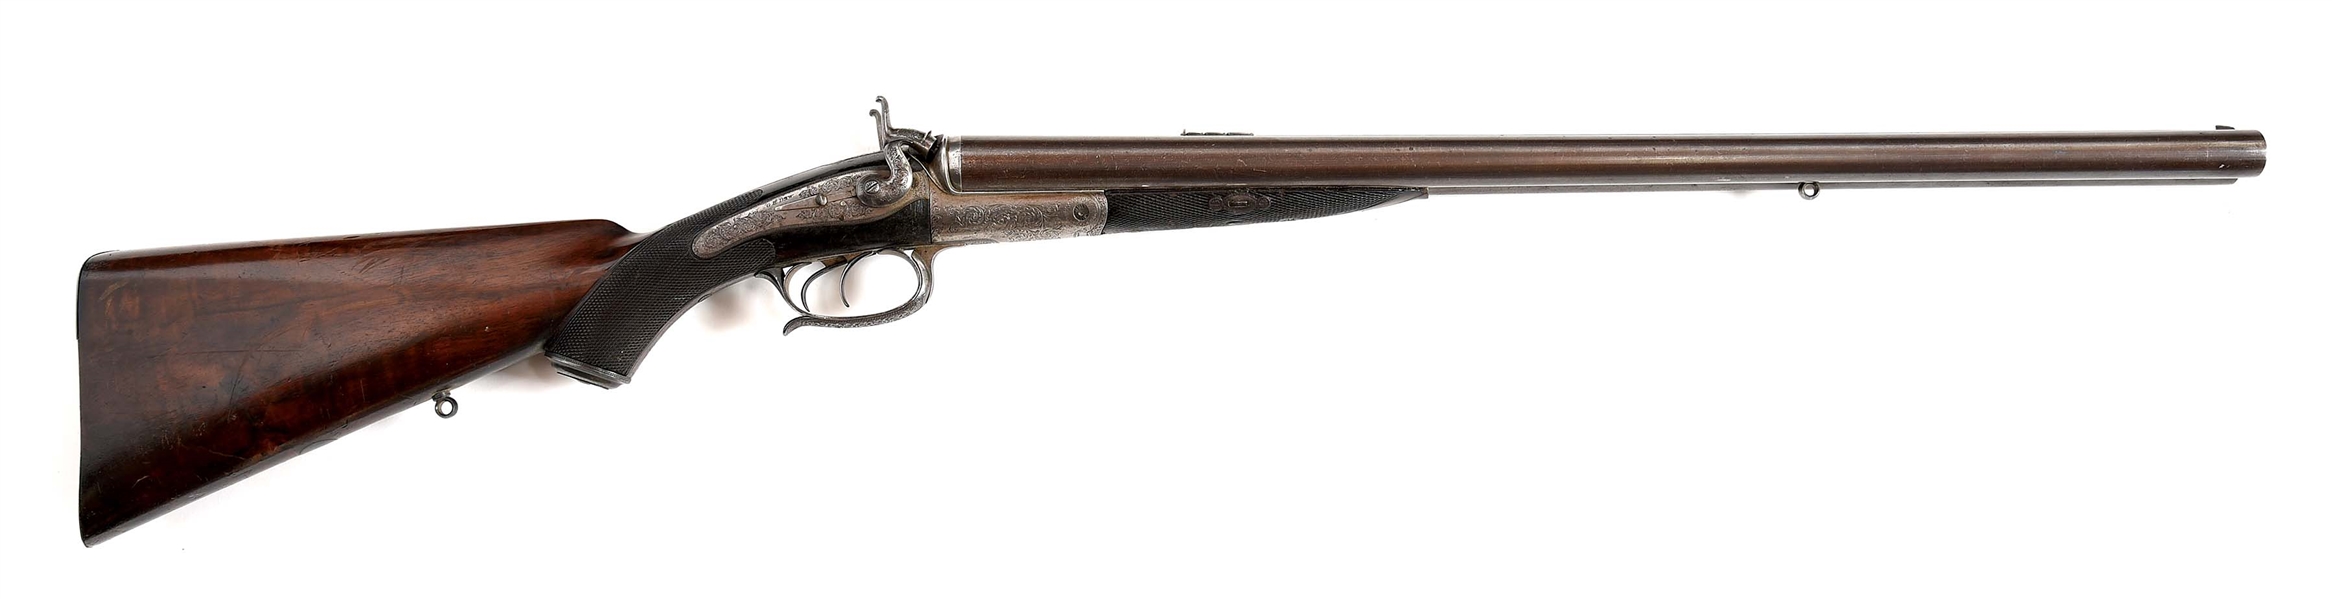 (A) AN ATTRACTIVE ENGRAVED GEORGE H. DAWS 12 BORE HAMMER DOUBLE RIFLE.